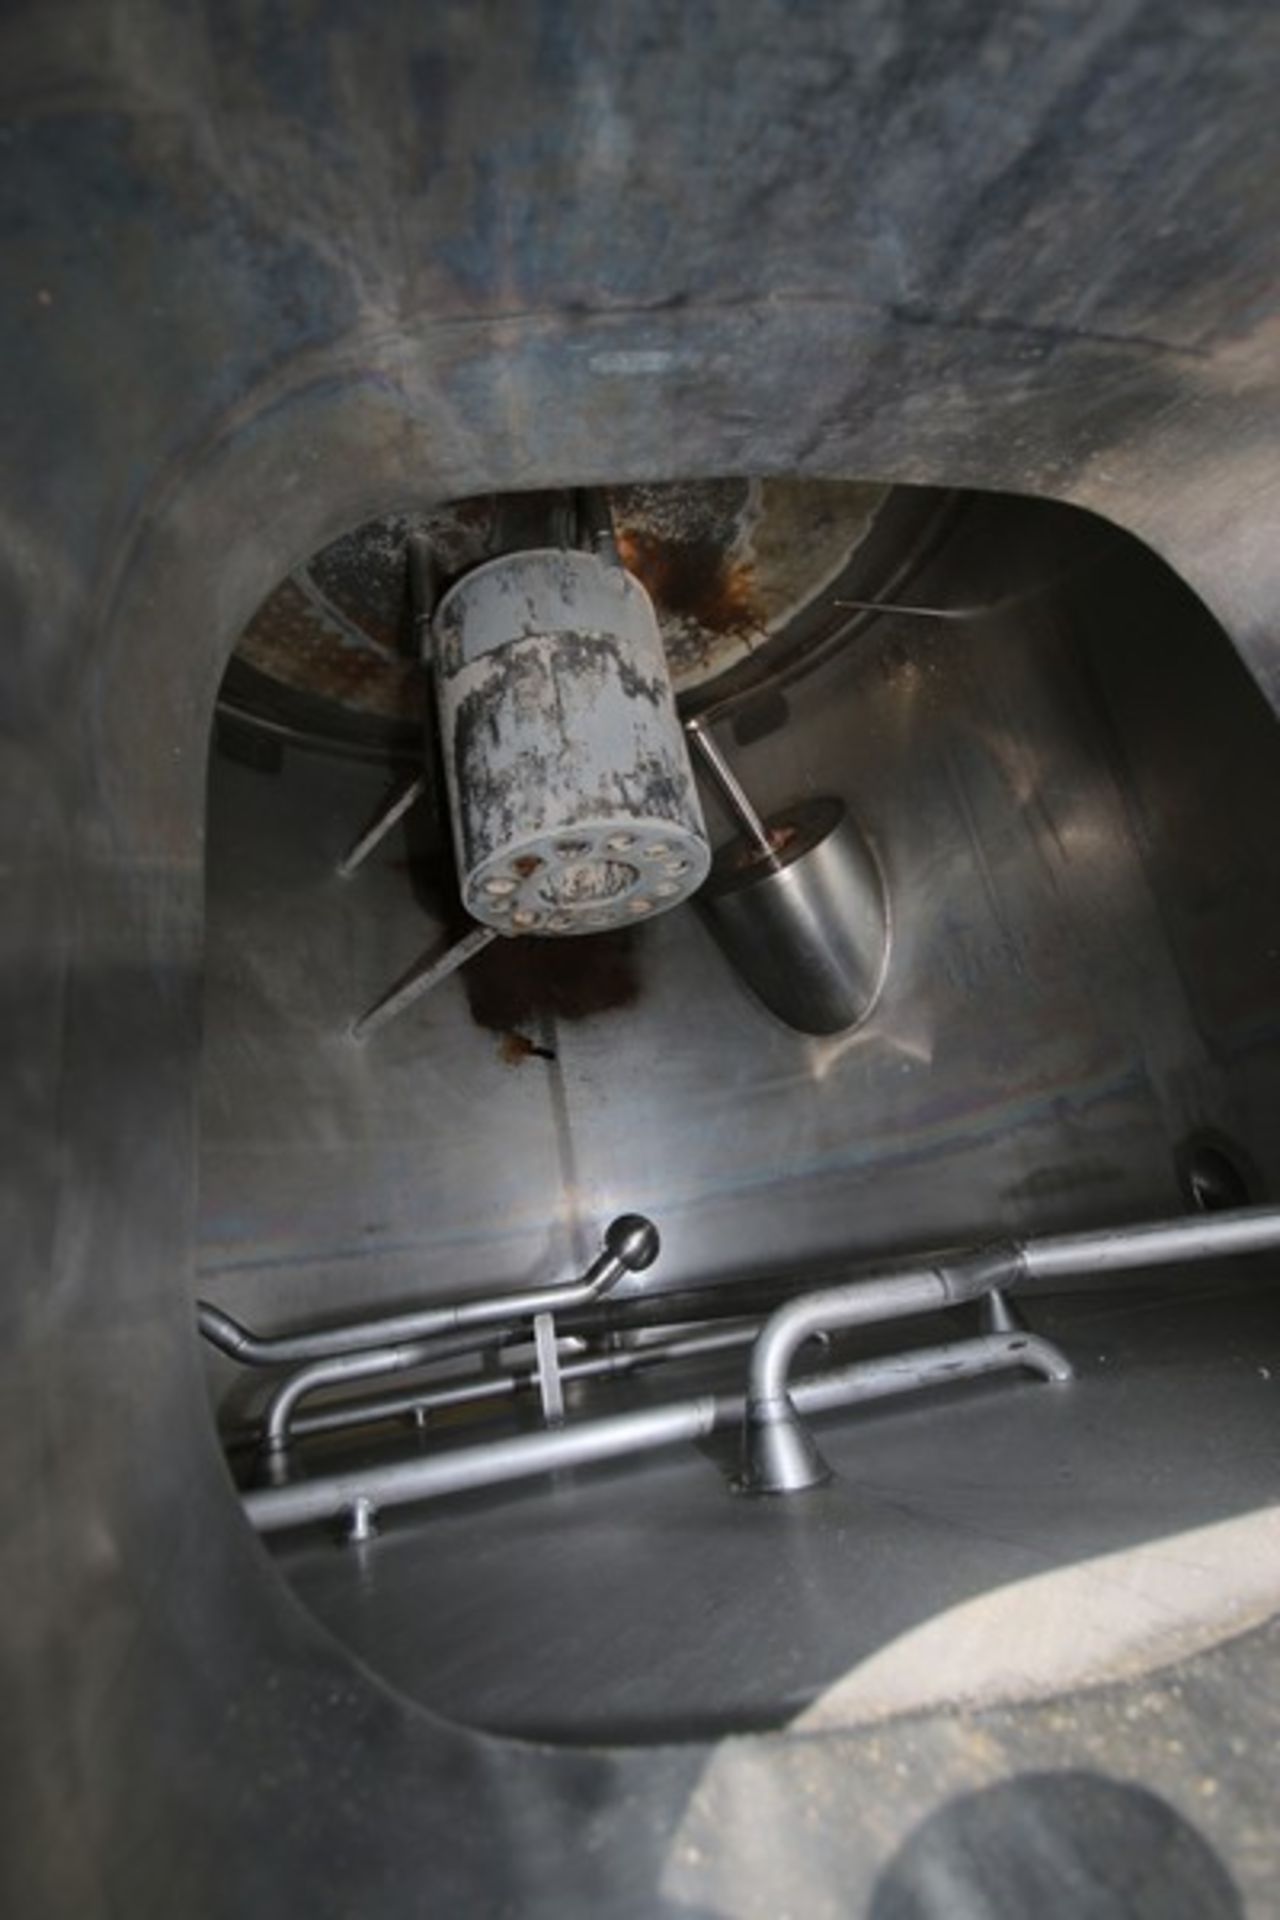 Munker/Braulogistik 15hL Combination Mash Tun/Kettle, M/N Brewhouse, S/N 1, 208 Volts, 3 Phase, with - Image 6 of 24